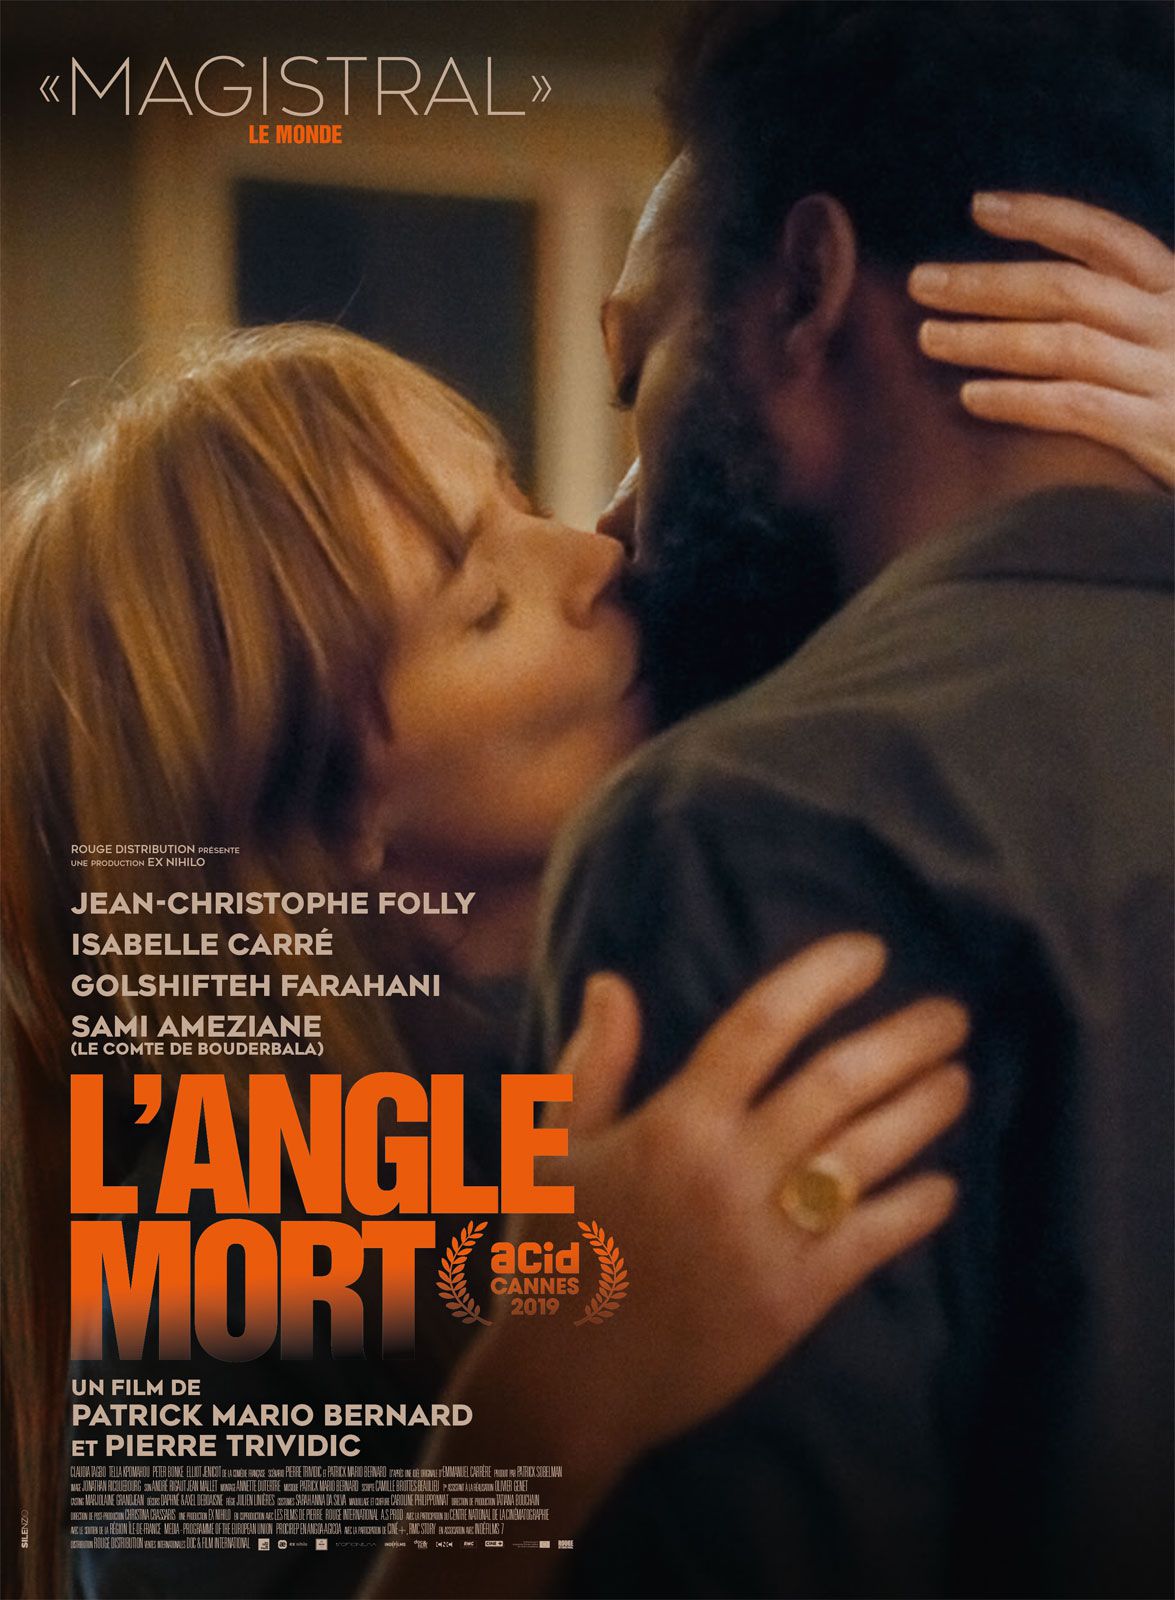 L'Angle mort - Film (2019) streaming VF gratuit complet